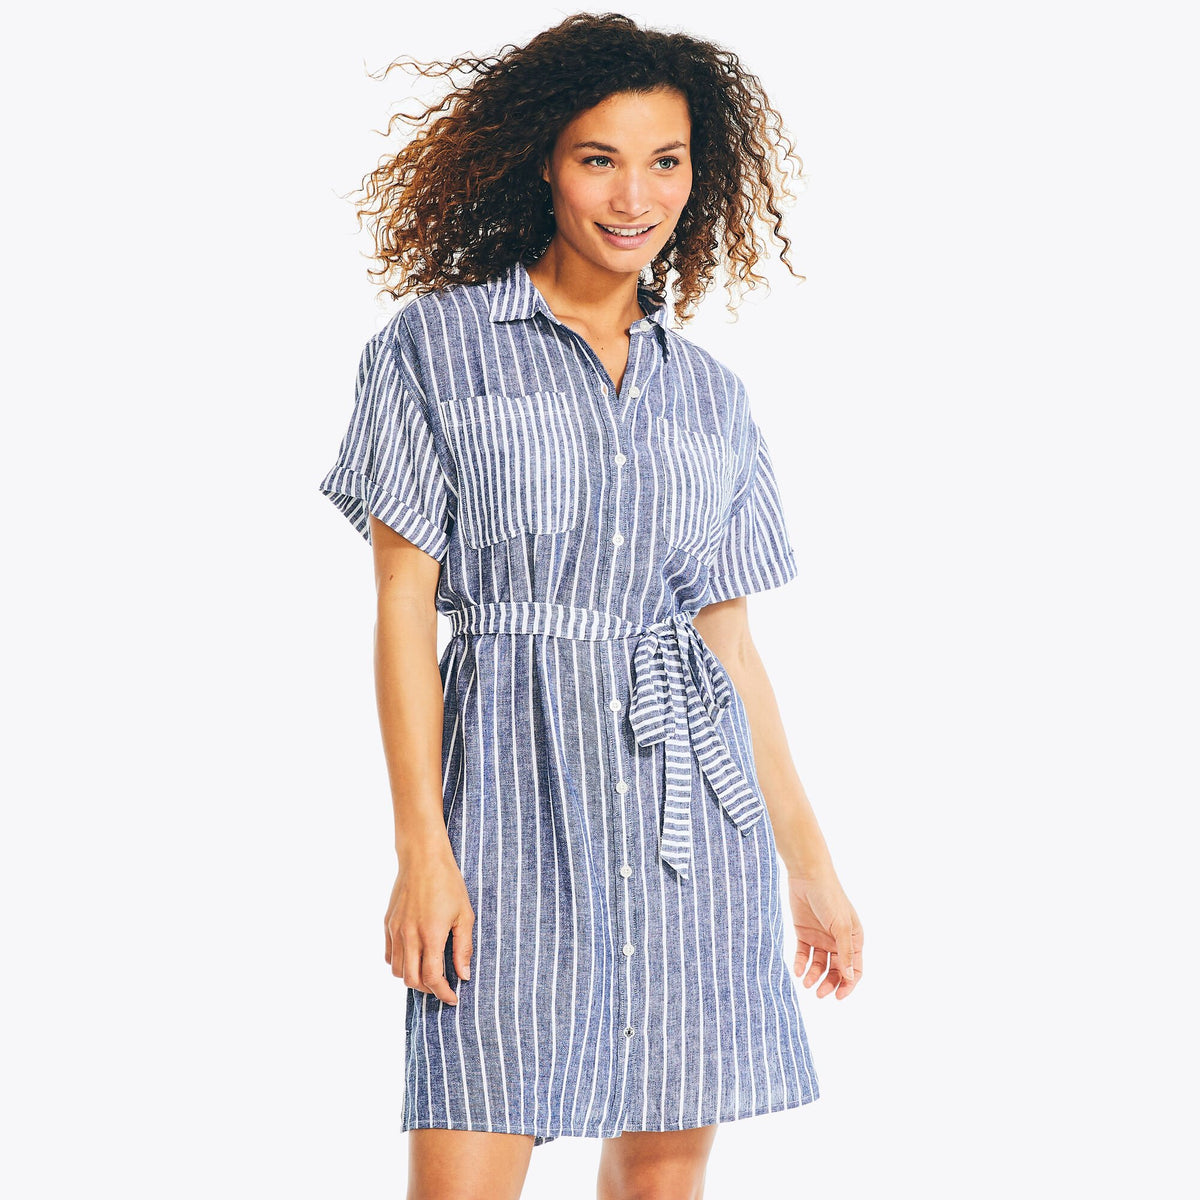 Nautica Women's Sustainably Crafted Striped Shirt Dress Bright White